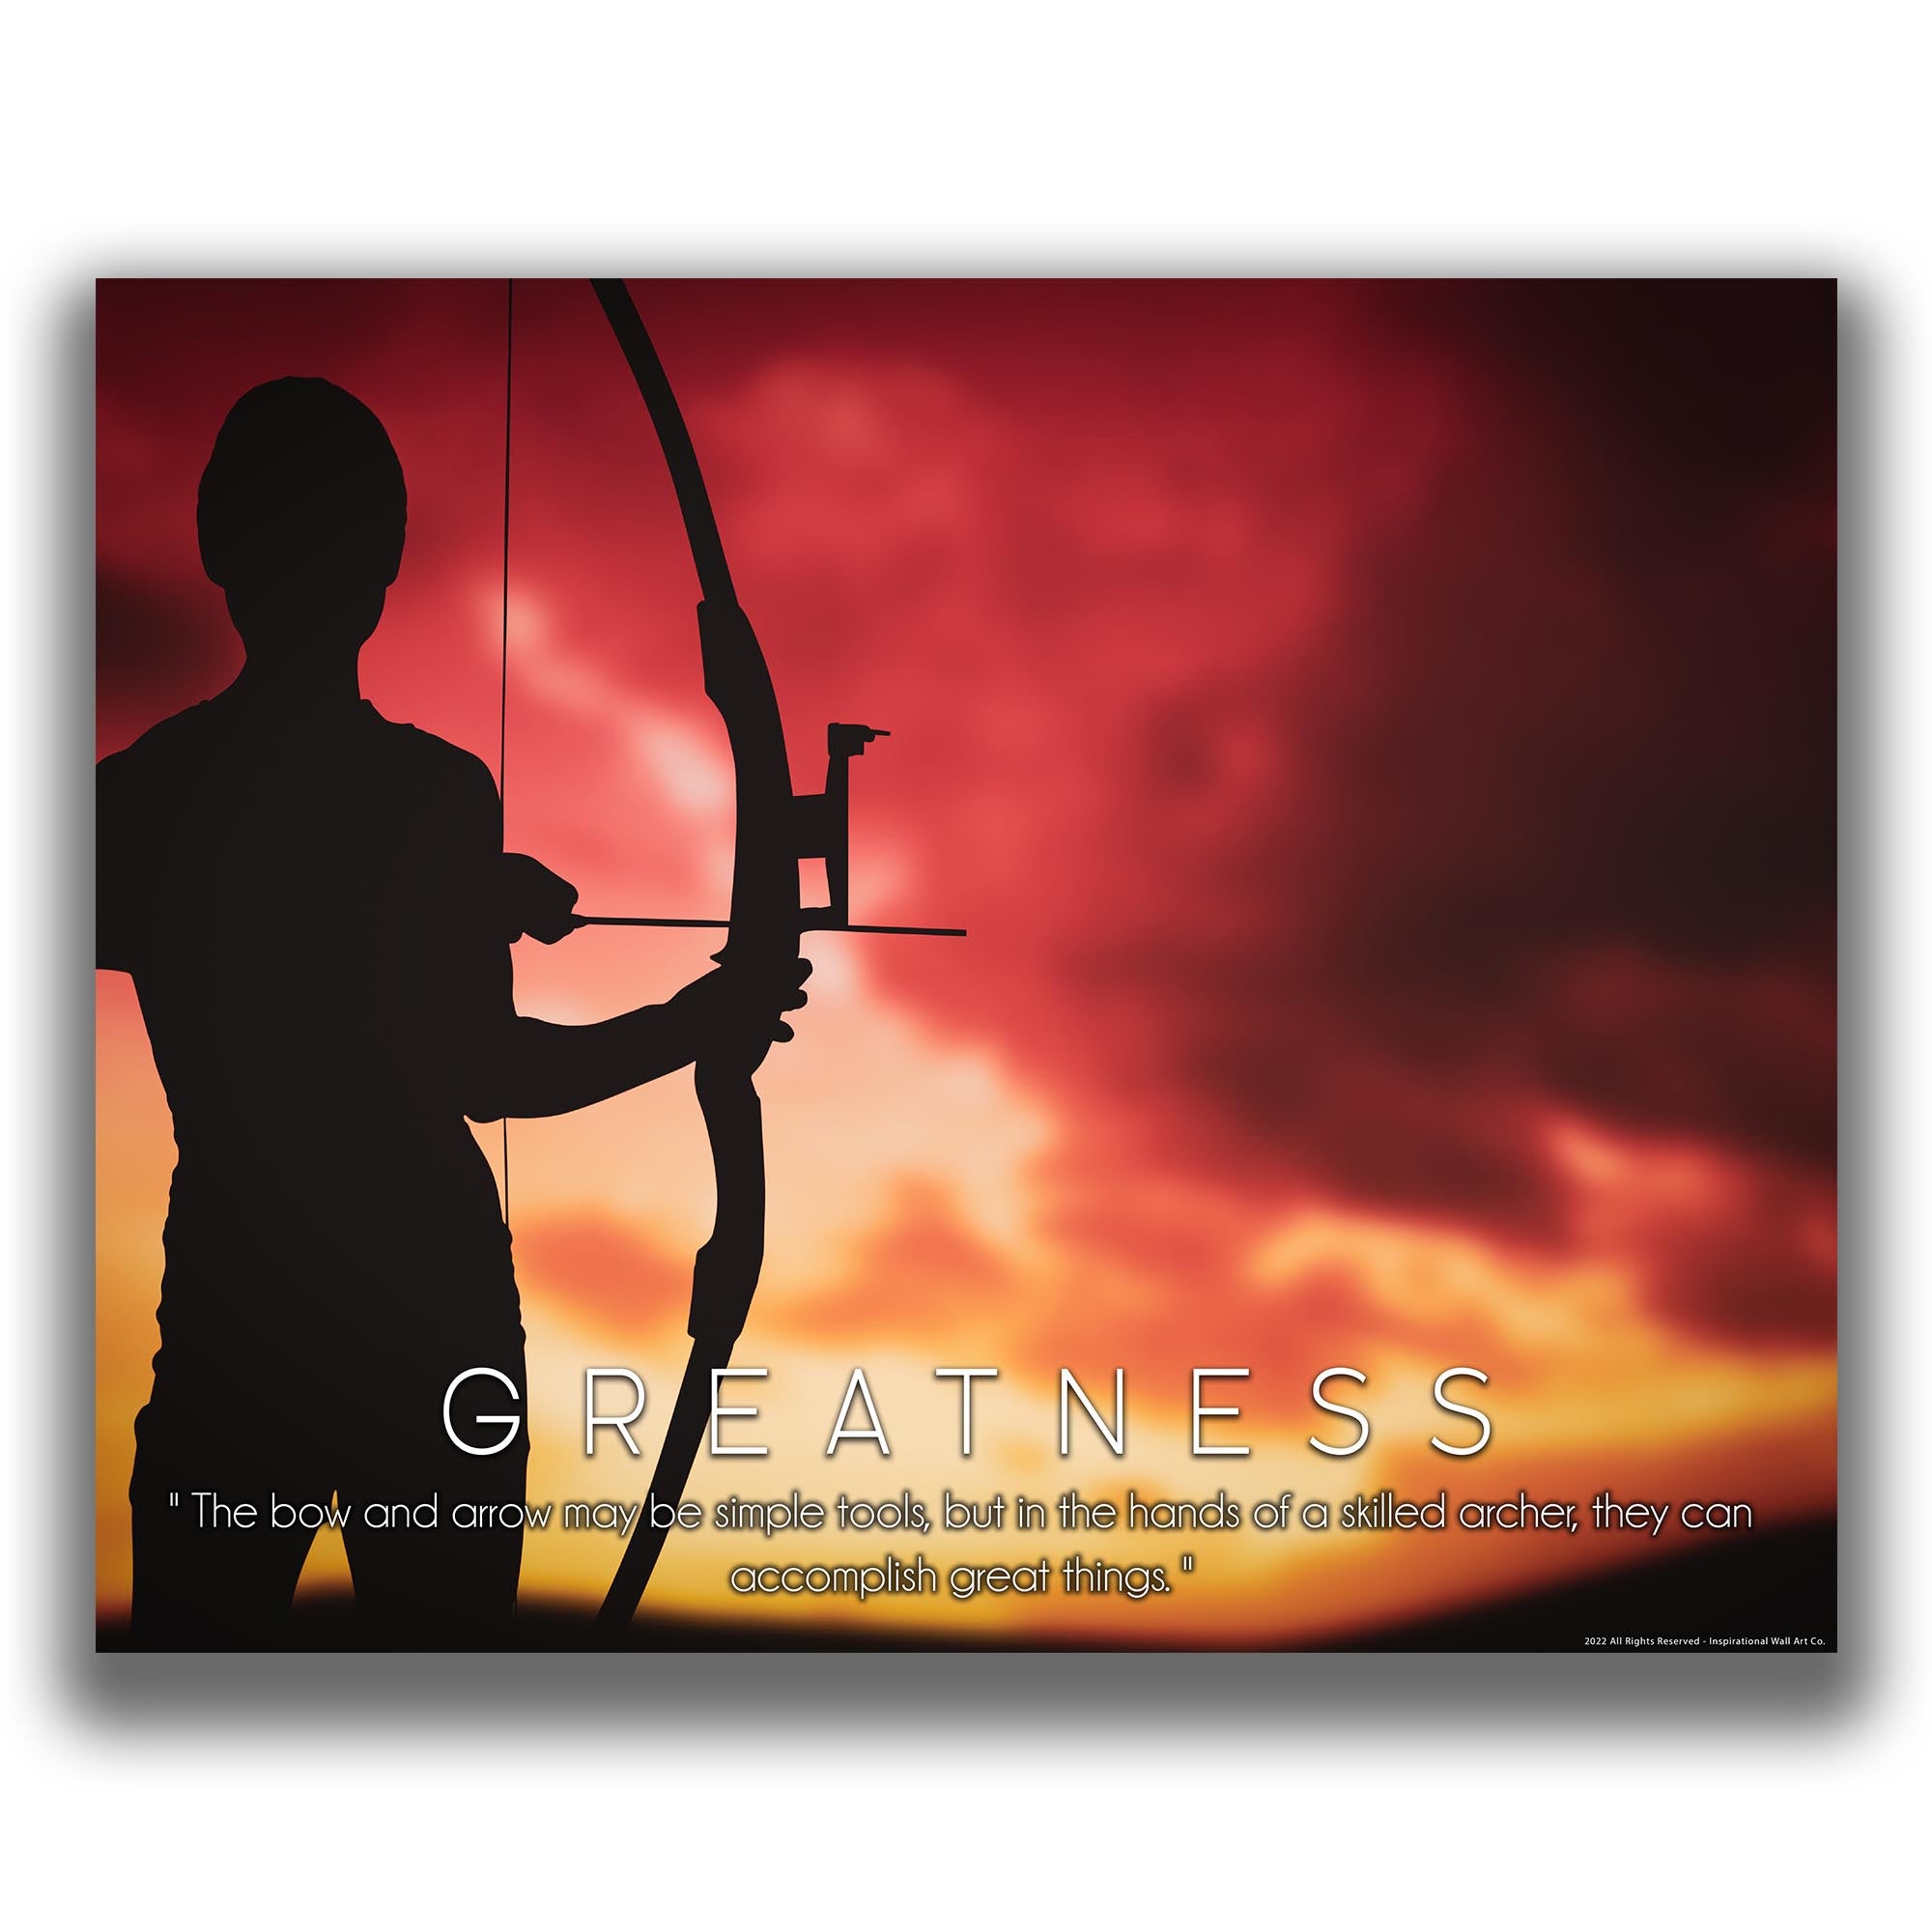 Greatness - Archery Poster